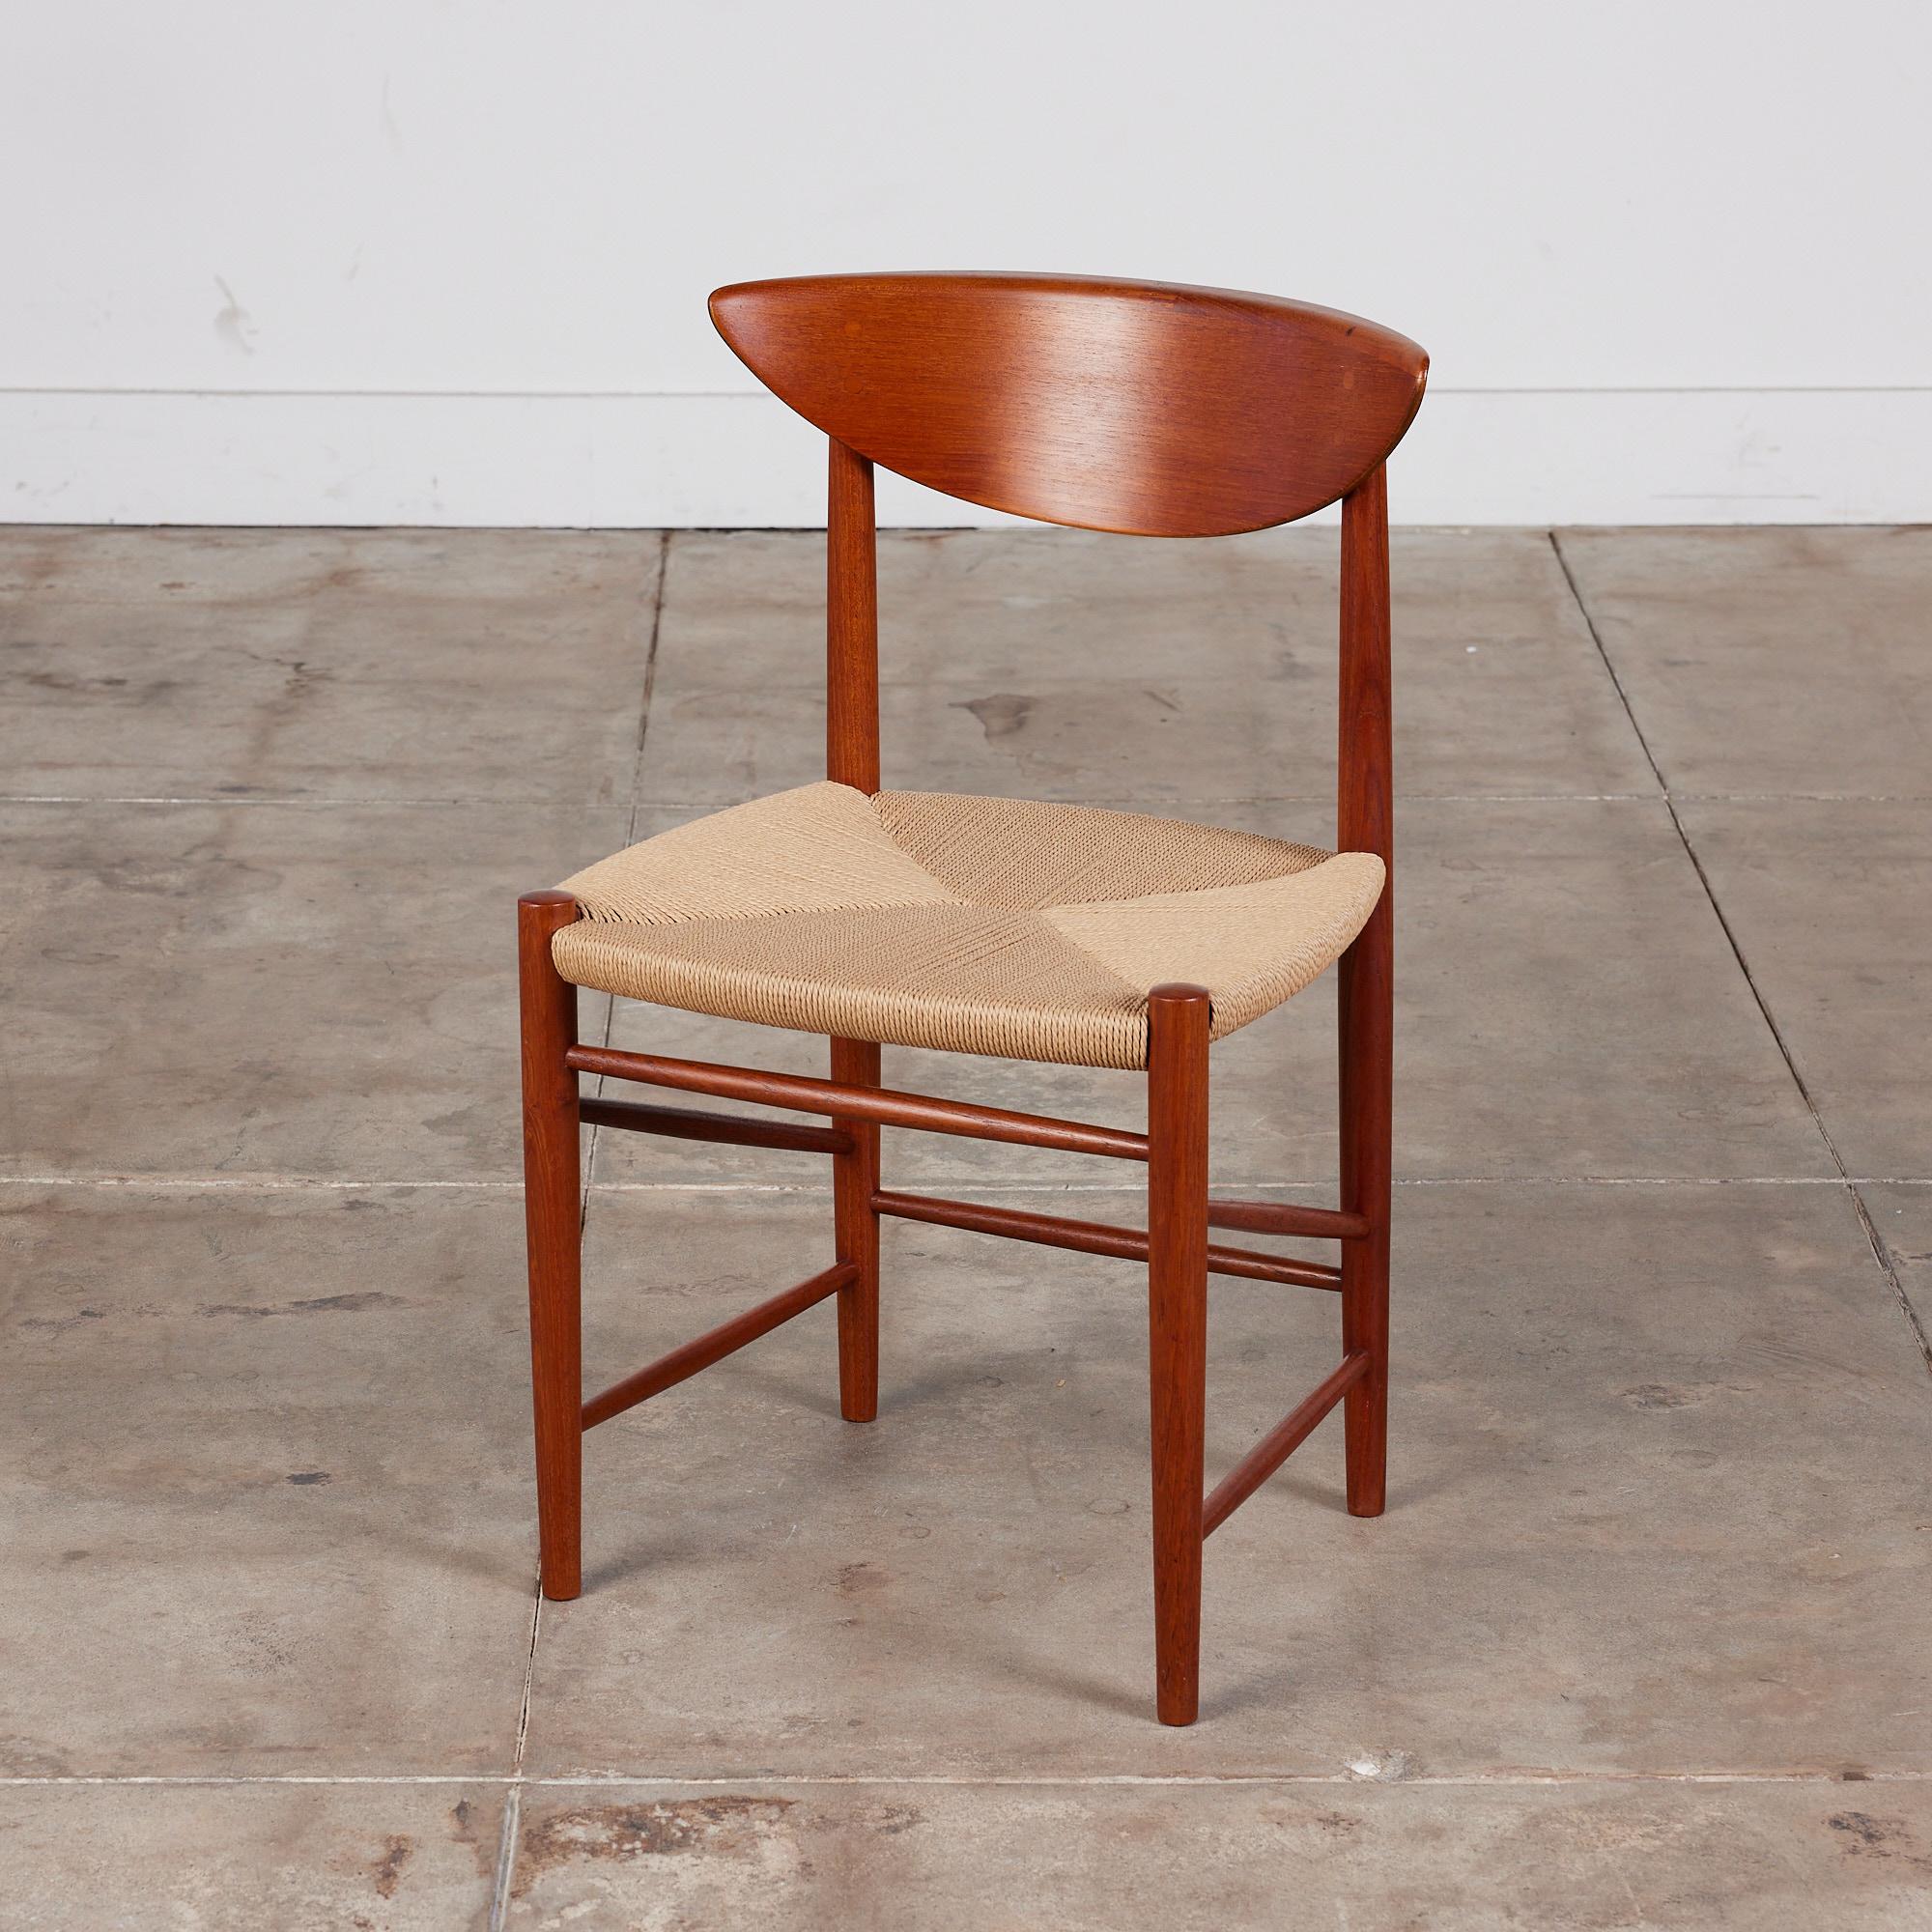 Model 316 chair by Peter Hvidt & Orla Mølgaard Nielsen for Soborg Mobelfabrik, Denmark. This chair, made in the 1950s, features a teak frame and newly woven paper cord seat.

Hvidt & Mølgaard had an established design and architectural firm where